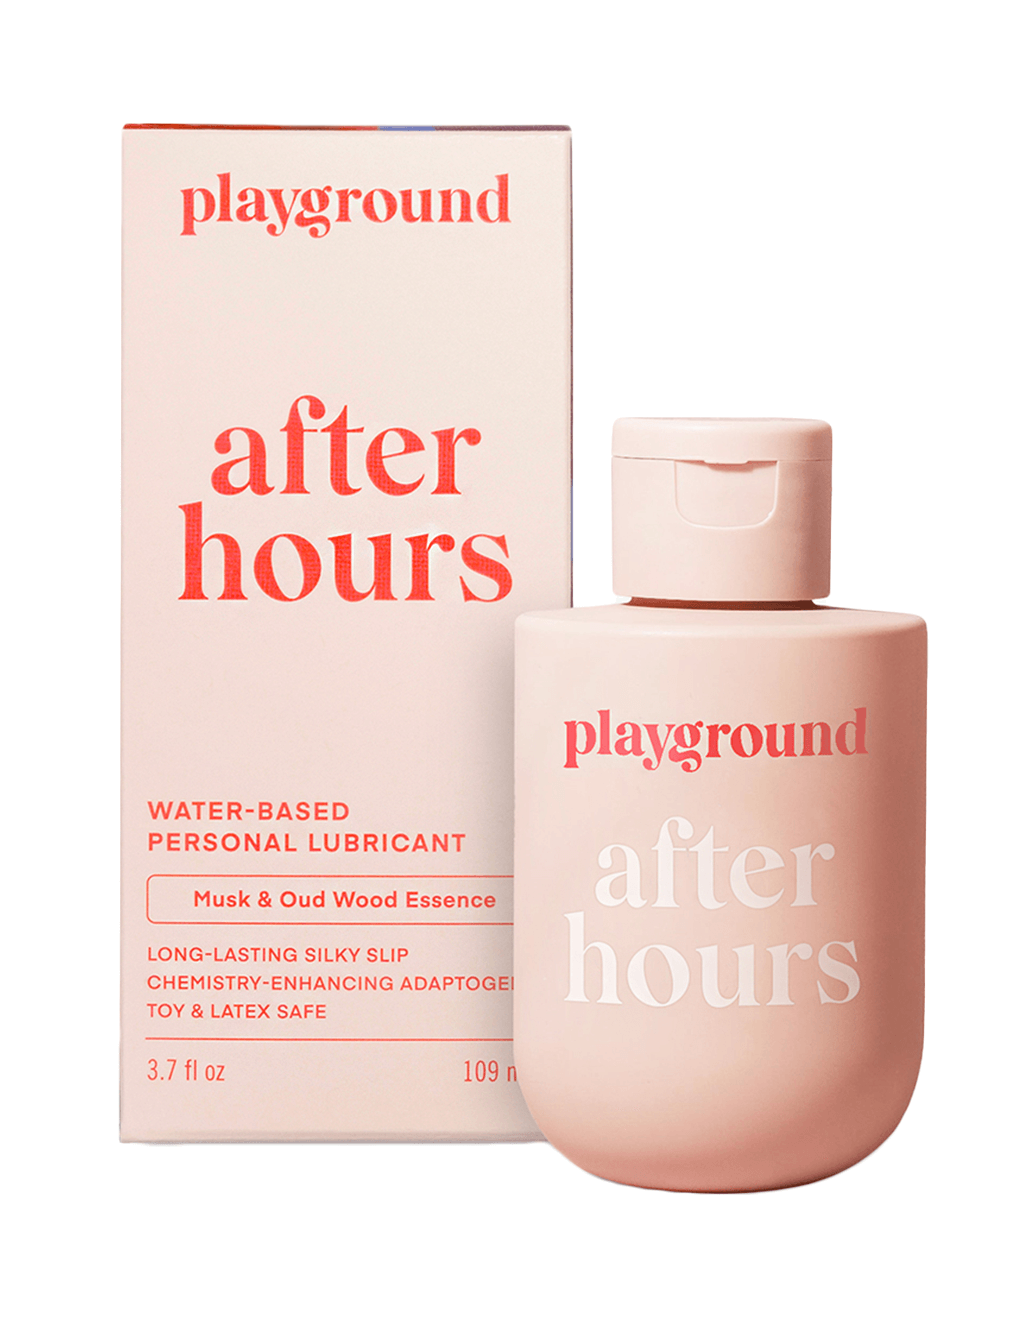 Playground After Hours Water-Based Lube - Product w/Box